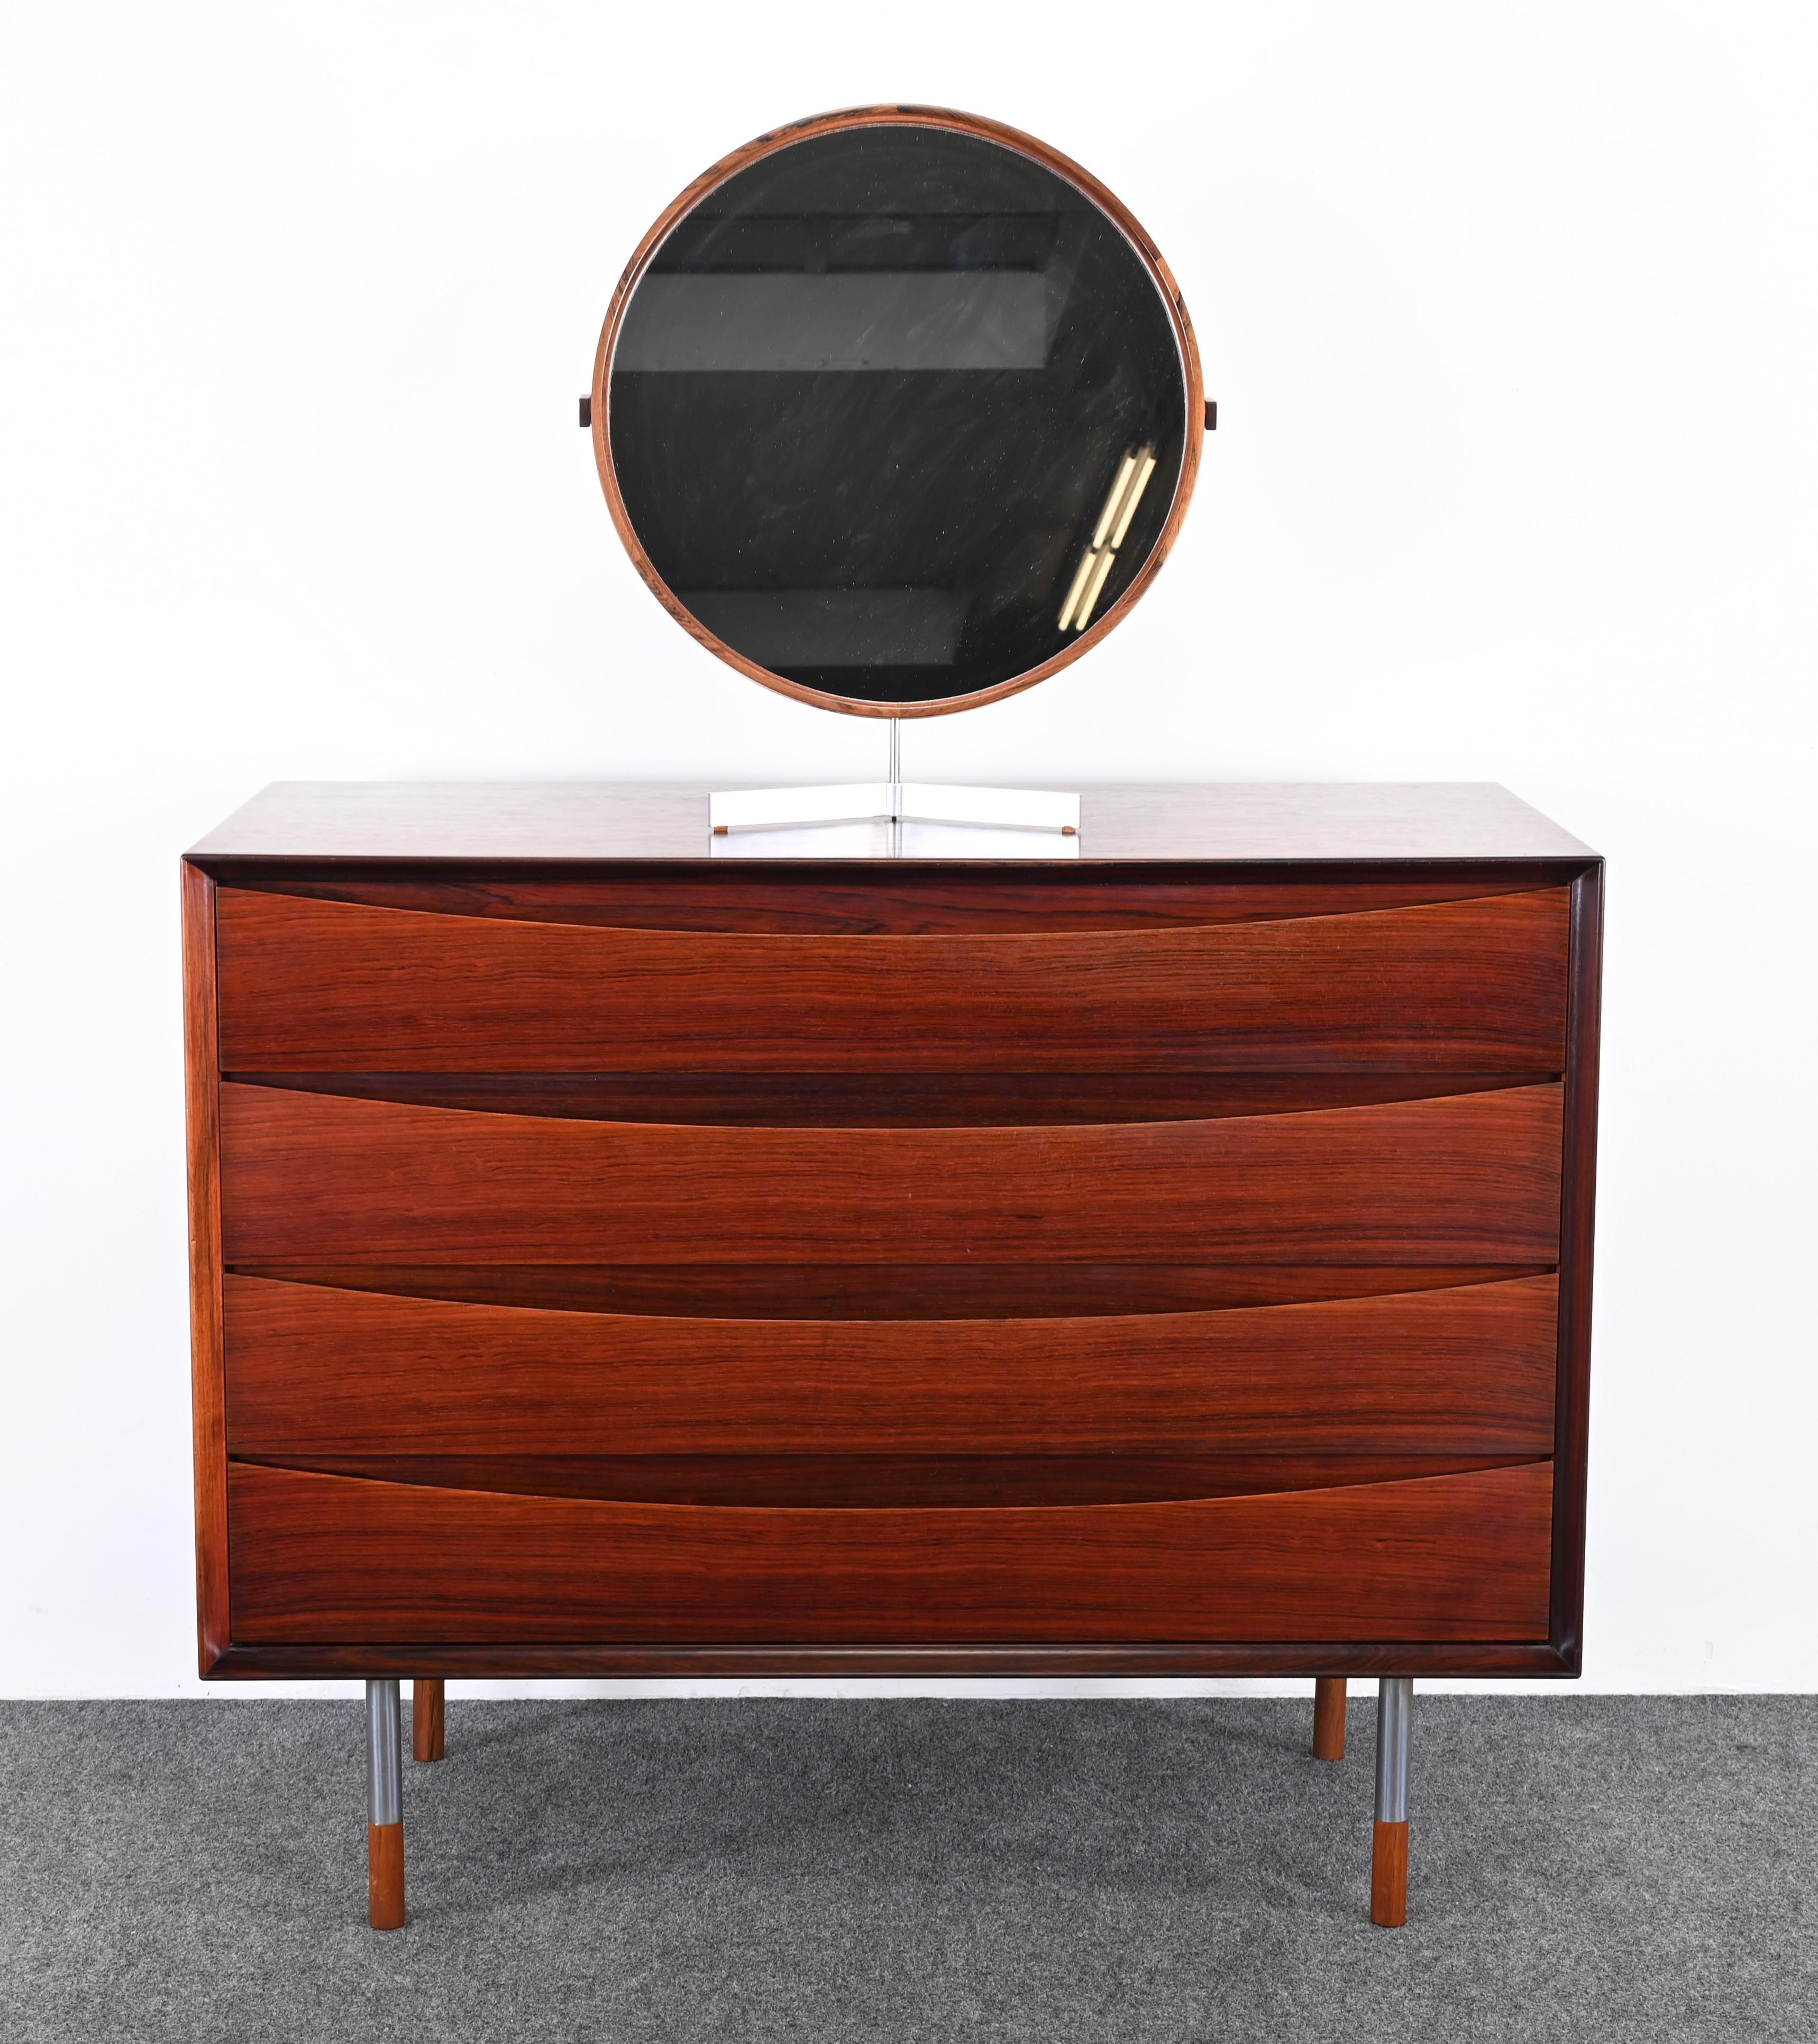 An elegant Uno & Östen Kristiansson Mirror Produced by Luxus in Vittsjö, Sweden. This beautiful rosewood mirror has great design and scale. It would look great on a vanity or chest, as shown in the images. The steel and rosewood mirror would look